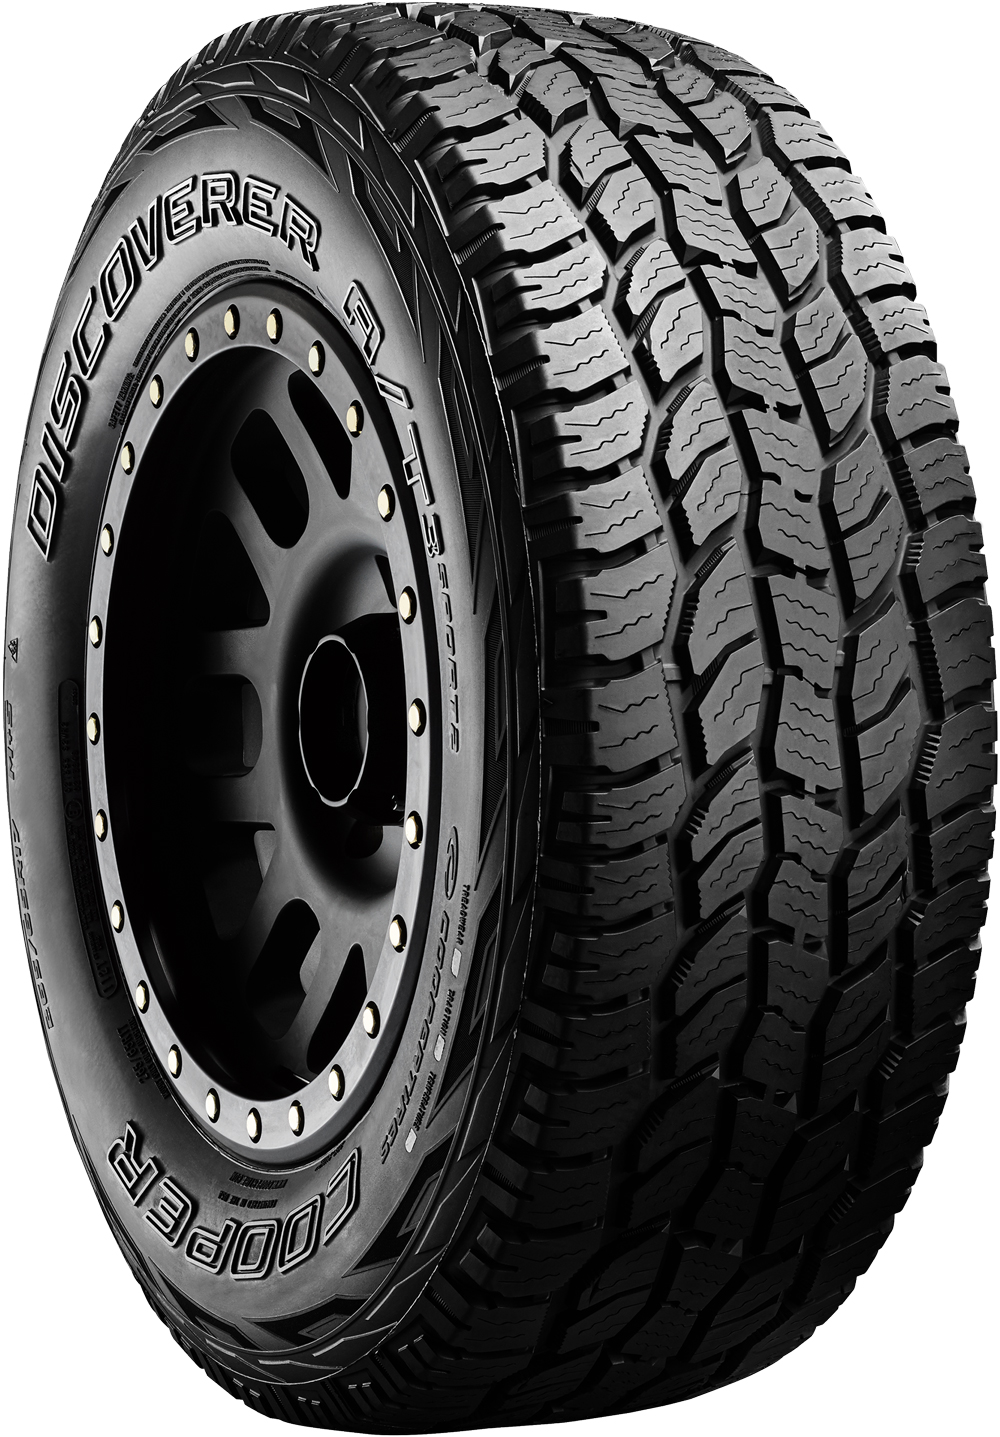 Джипови гуми COOPER DISCOVERER A/T3 SPORT 2 BSW 205/80 R16 110S